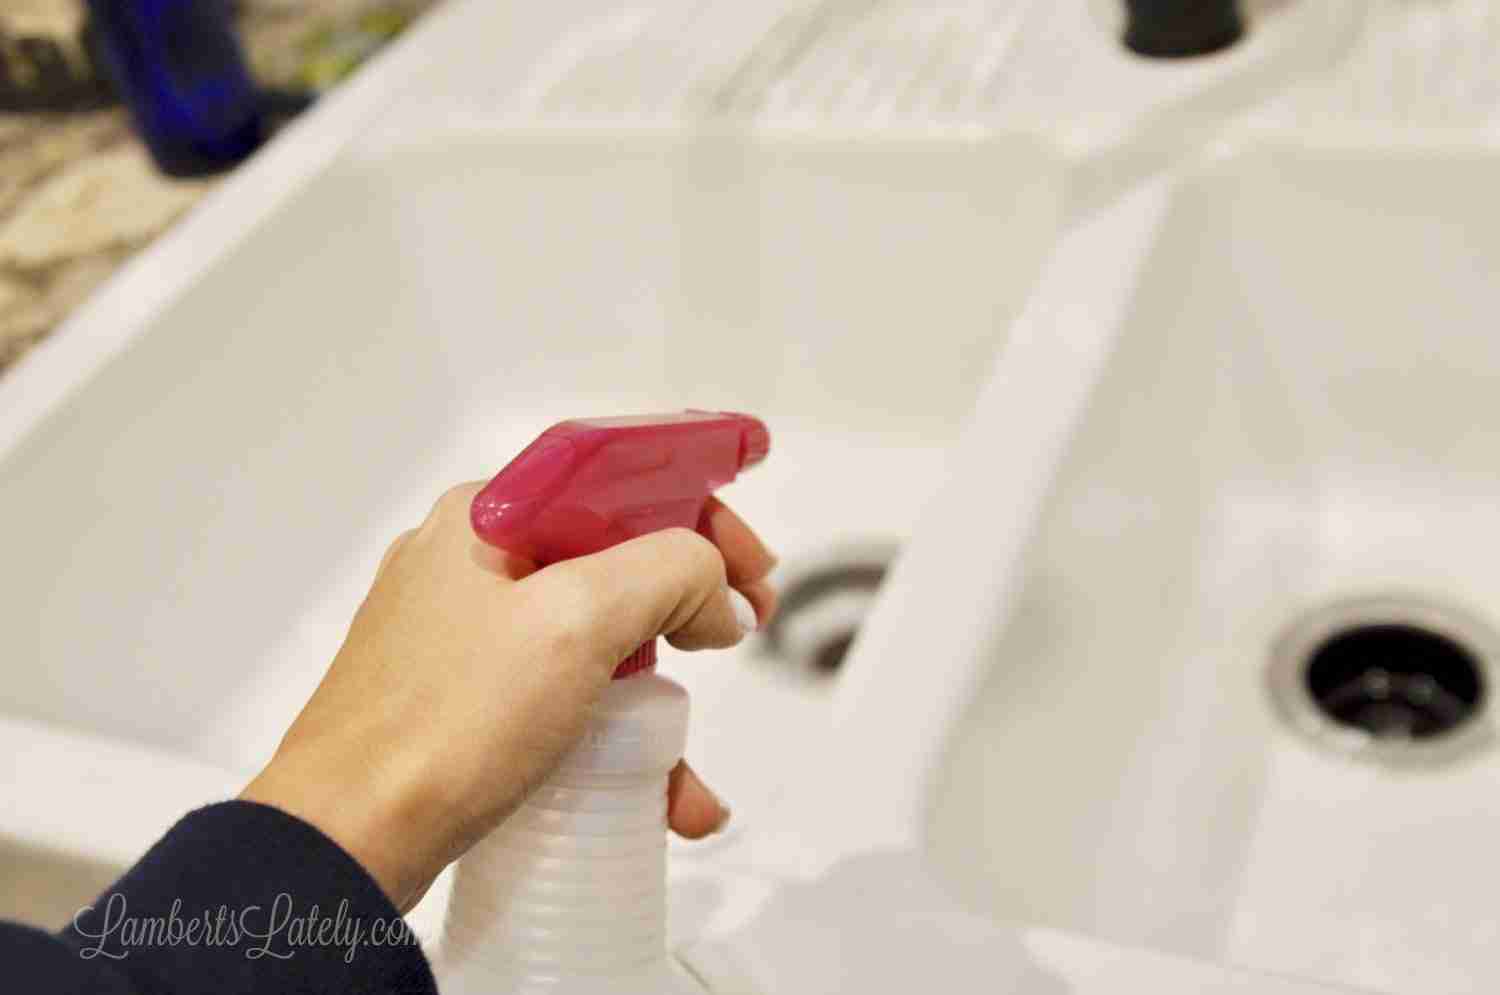 how to clean a porcelain sink - spray with vinegar